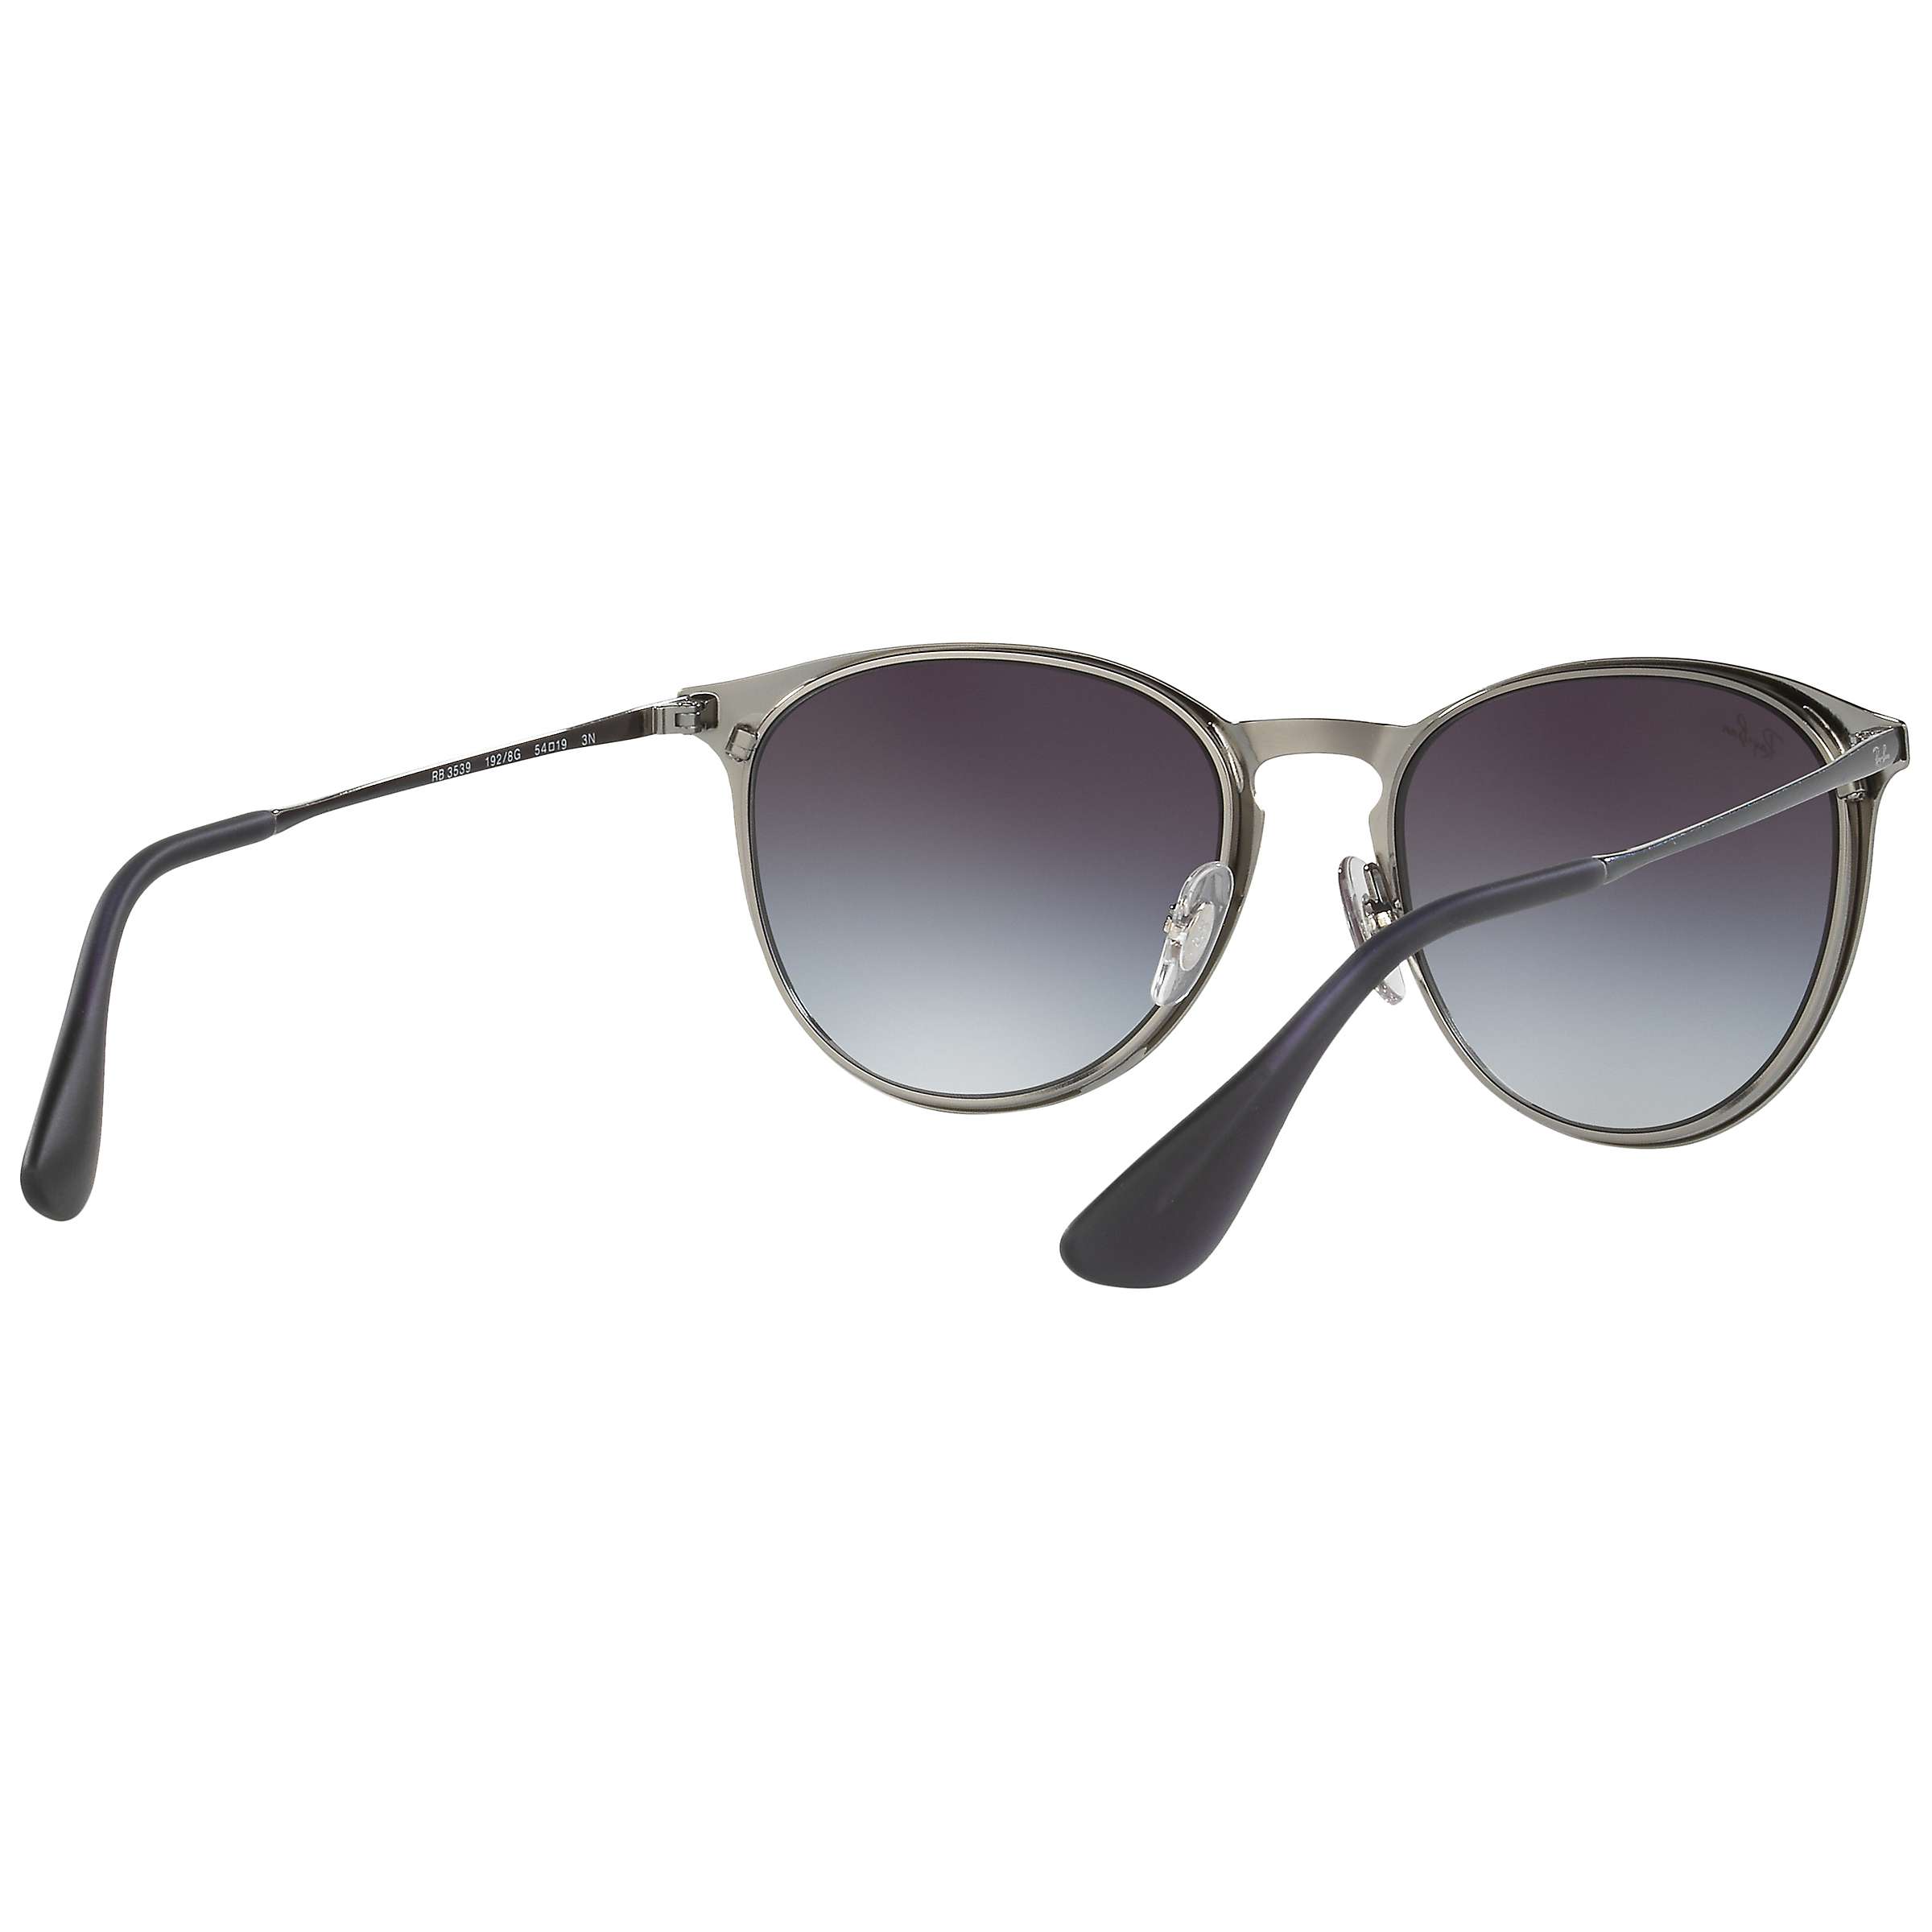 Buy Ray-Ban RB3539 Erika Oval Sunglasses Online at johnlewis.com